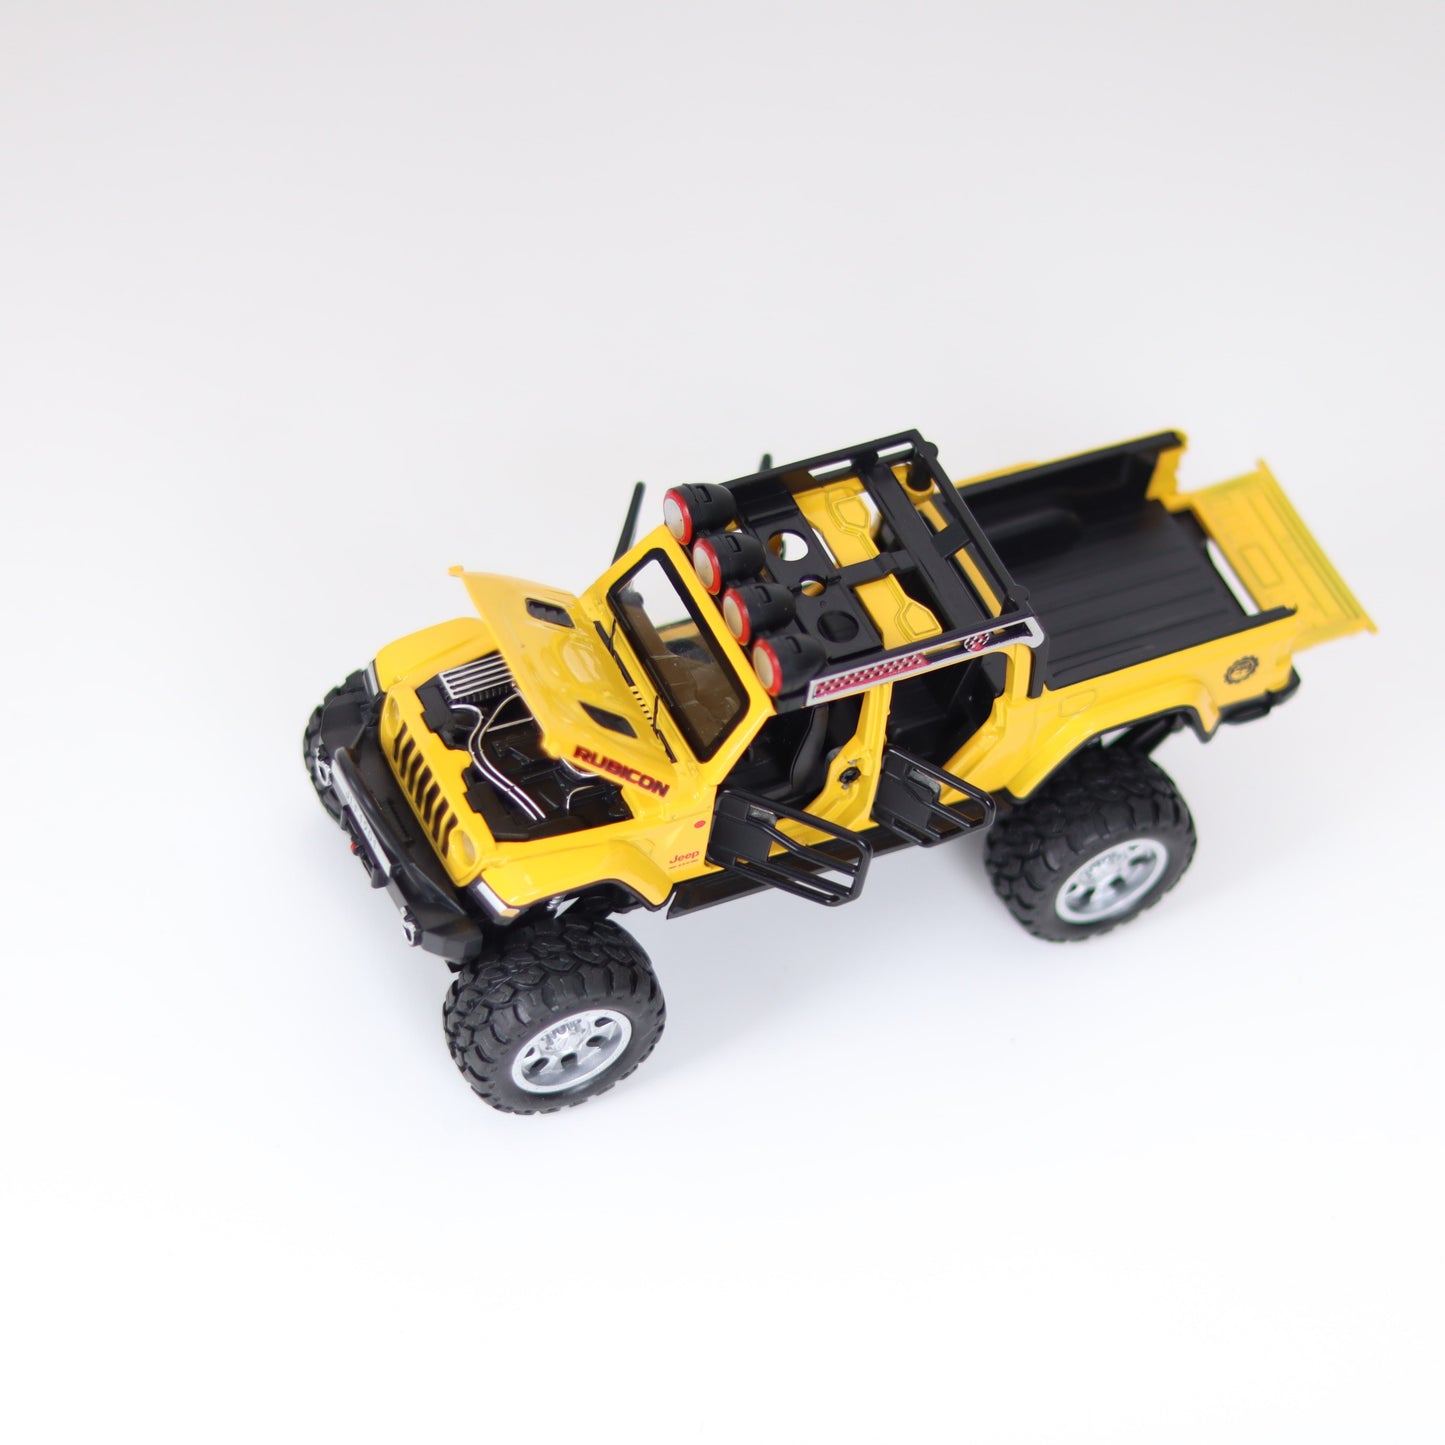 Jeep Wrangler Rubicon 1:26 Scale Die cast Metal Pullback Toy car with Openable Doors & Light(Yellow)